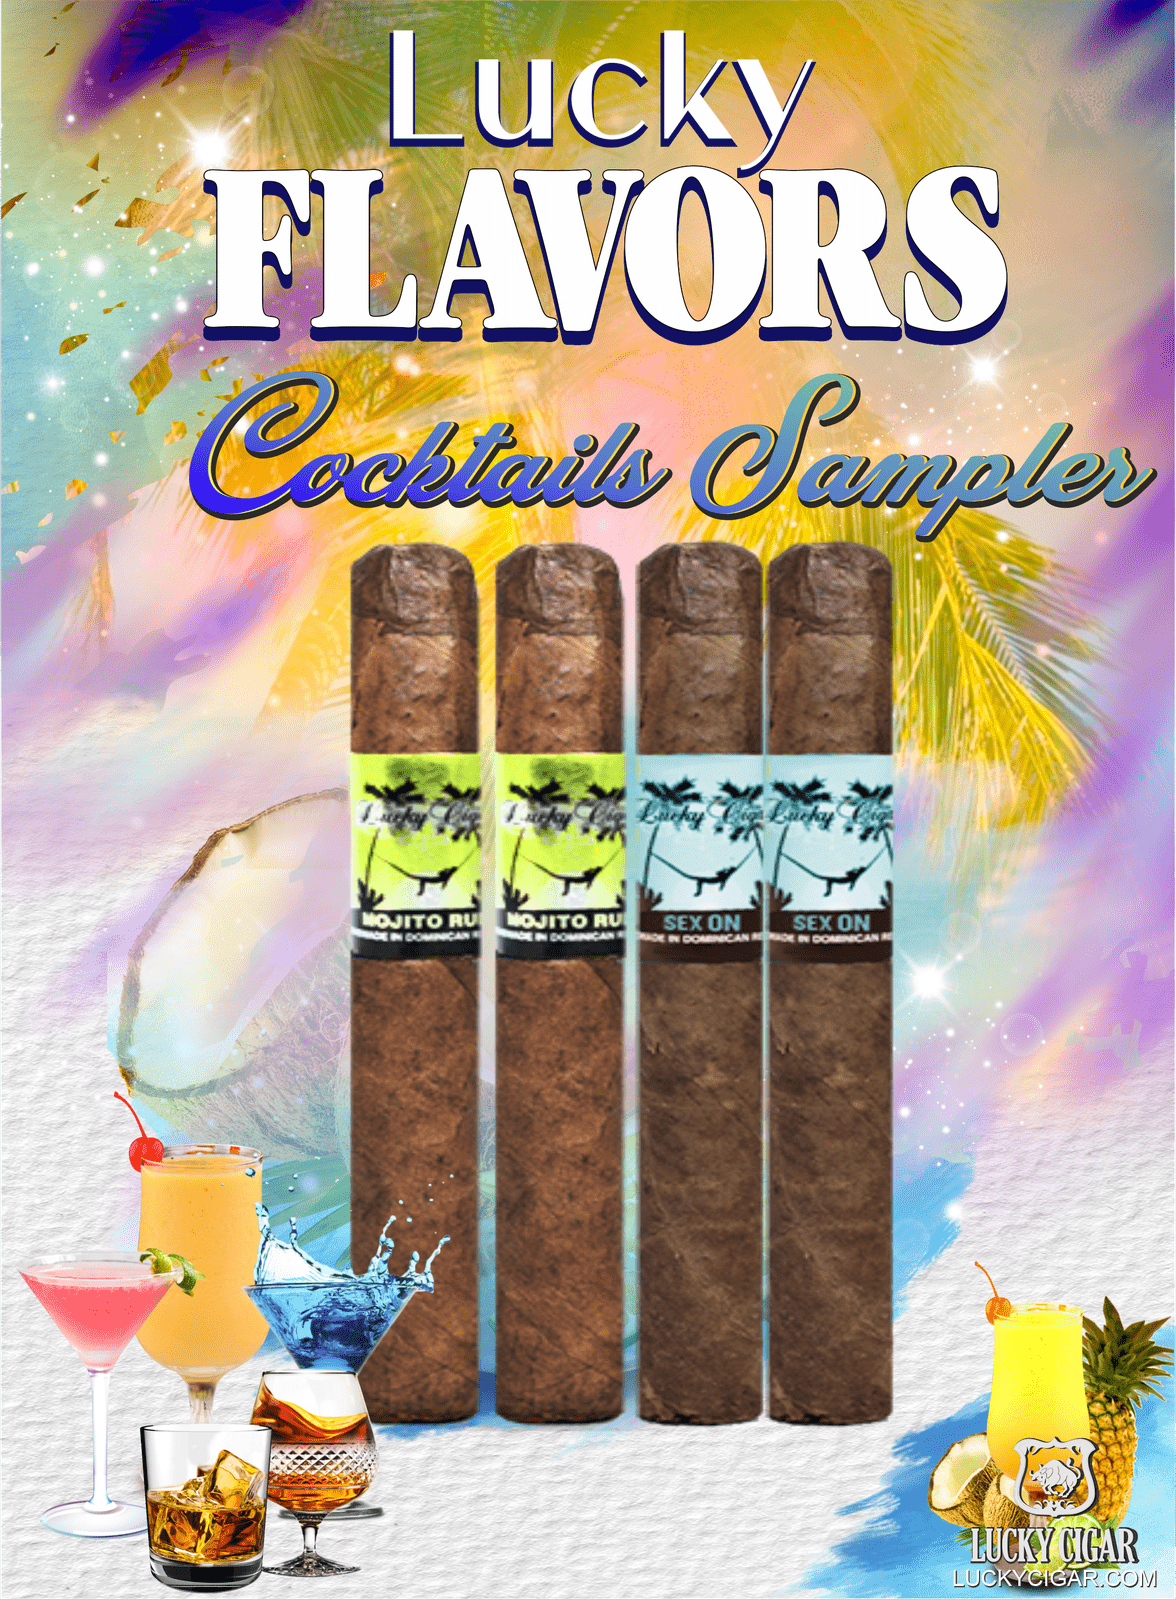 Flavored Cigars: Lucky Flavors 4 Piece Cocktails Sampler 2 Mojito Rum 5x42 Cigars 2 Sex On The Beach 5x42 Cigars